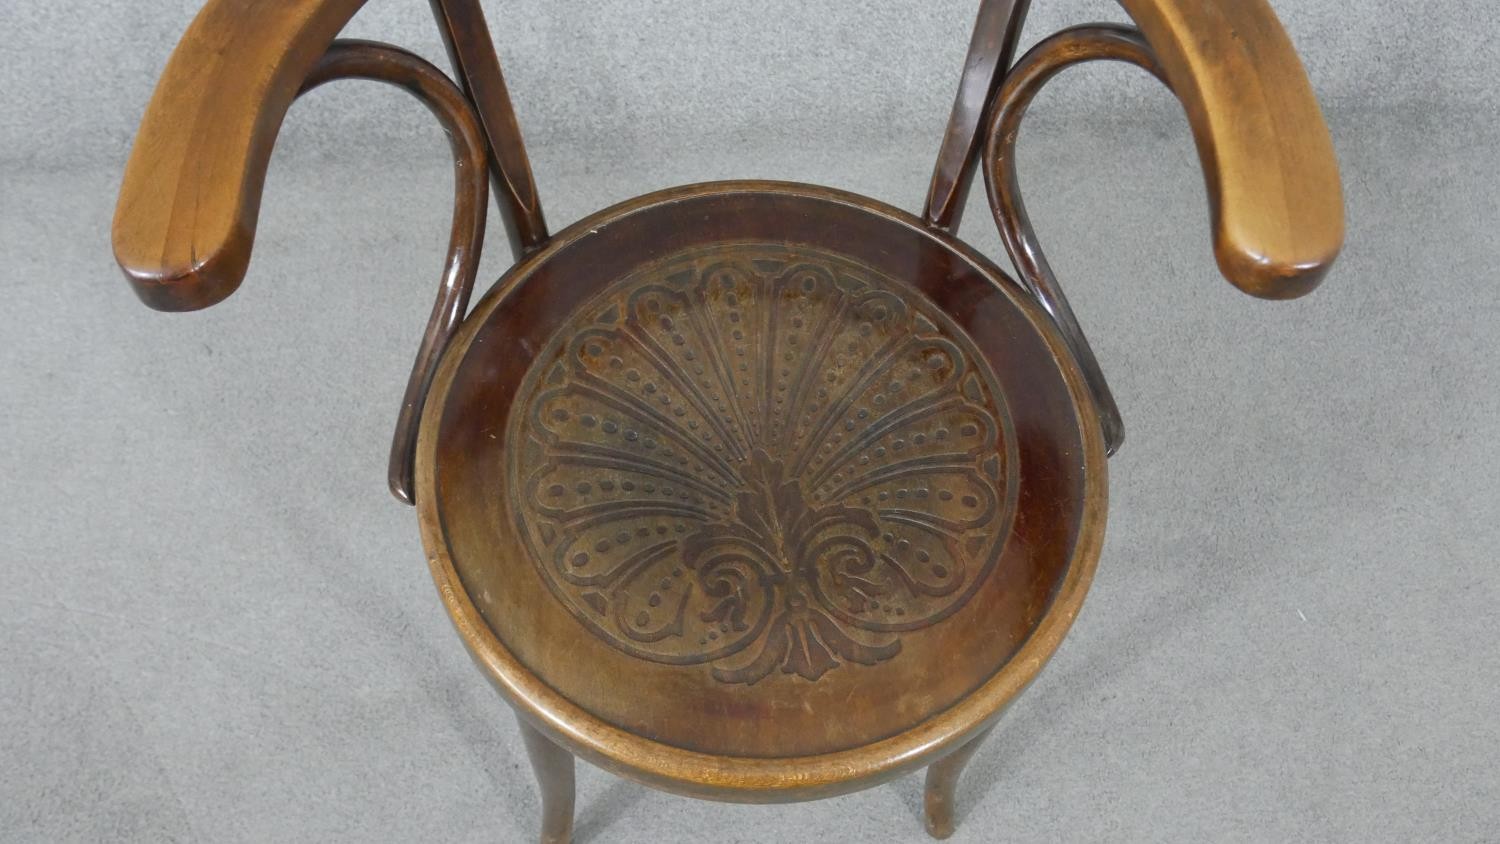 A late 19th/early 20th century Thonet style bentwood open armchair, with a circular pokerwork seat - Image 3 of 8